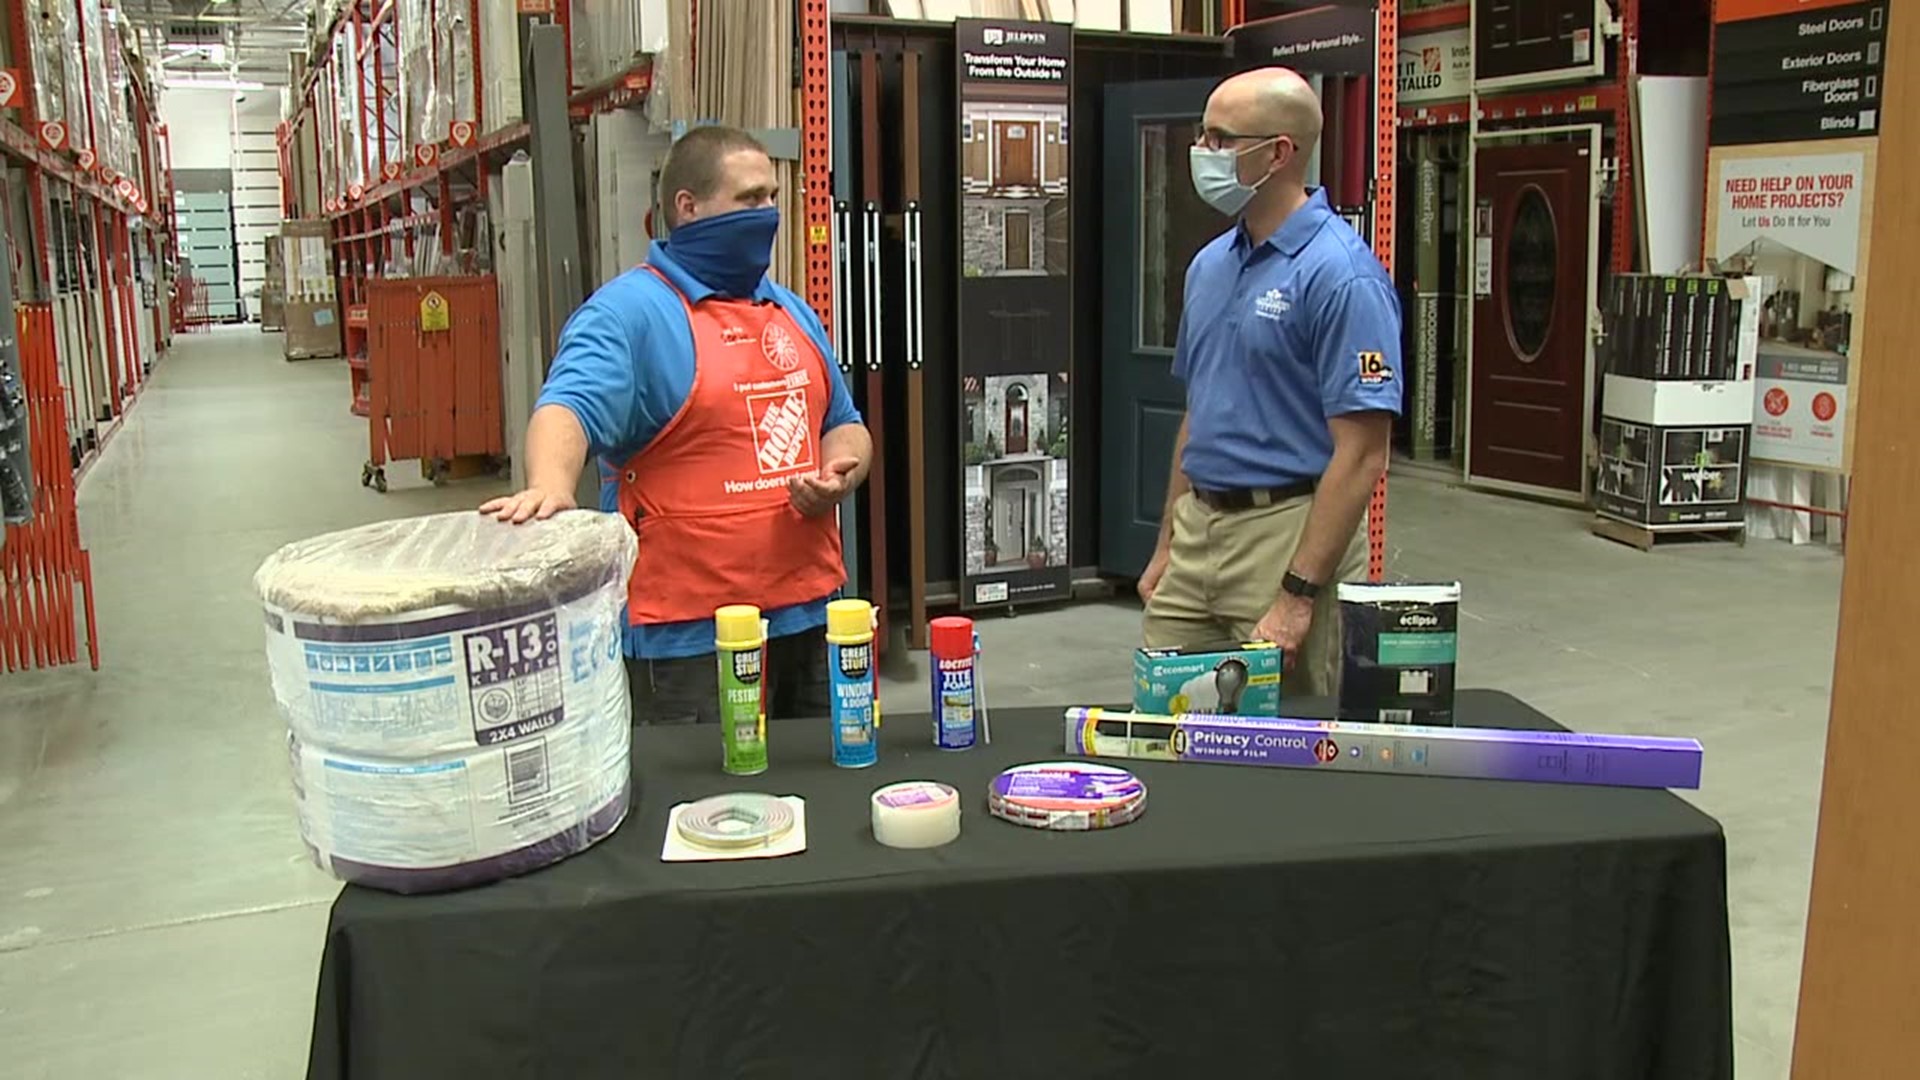 An expert at The Home Depot shared some do-it-yourself tips to stay cool while saving cash.